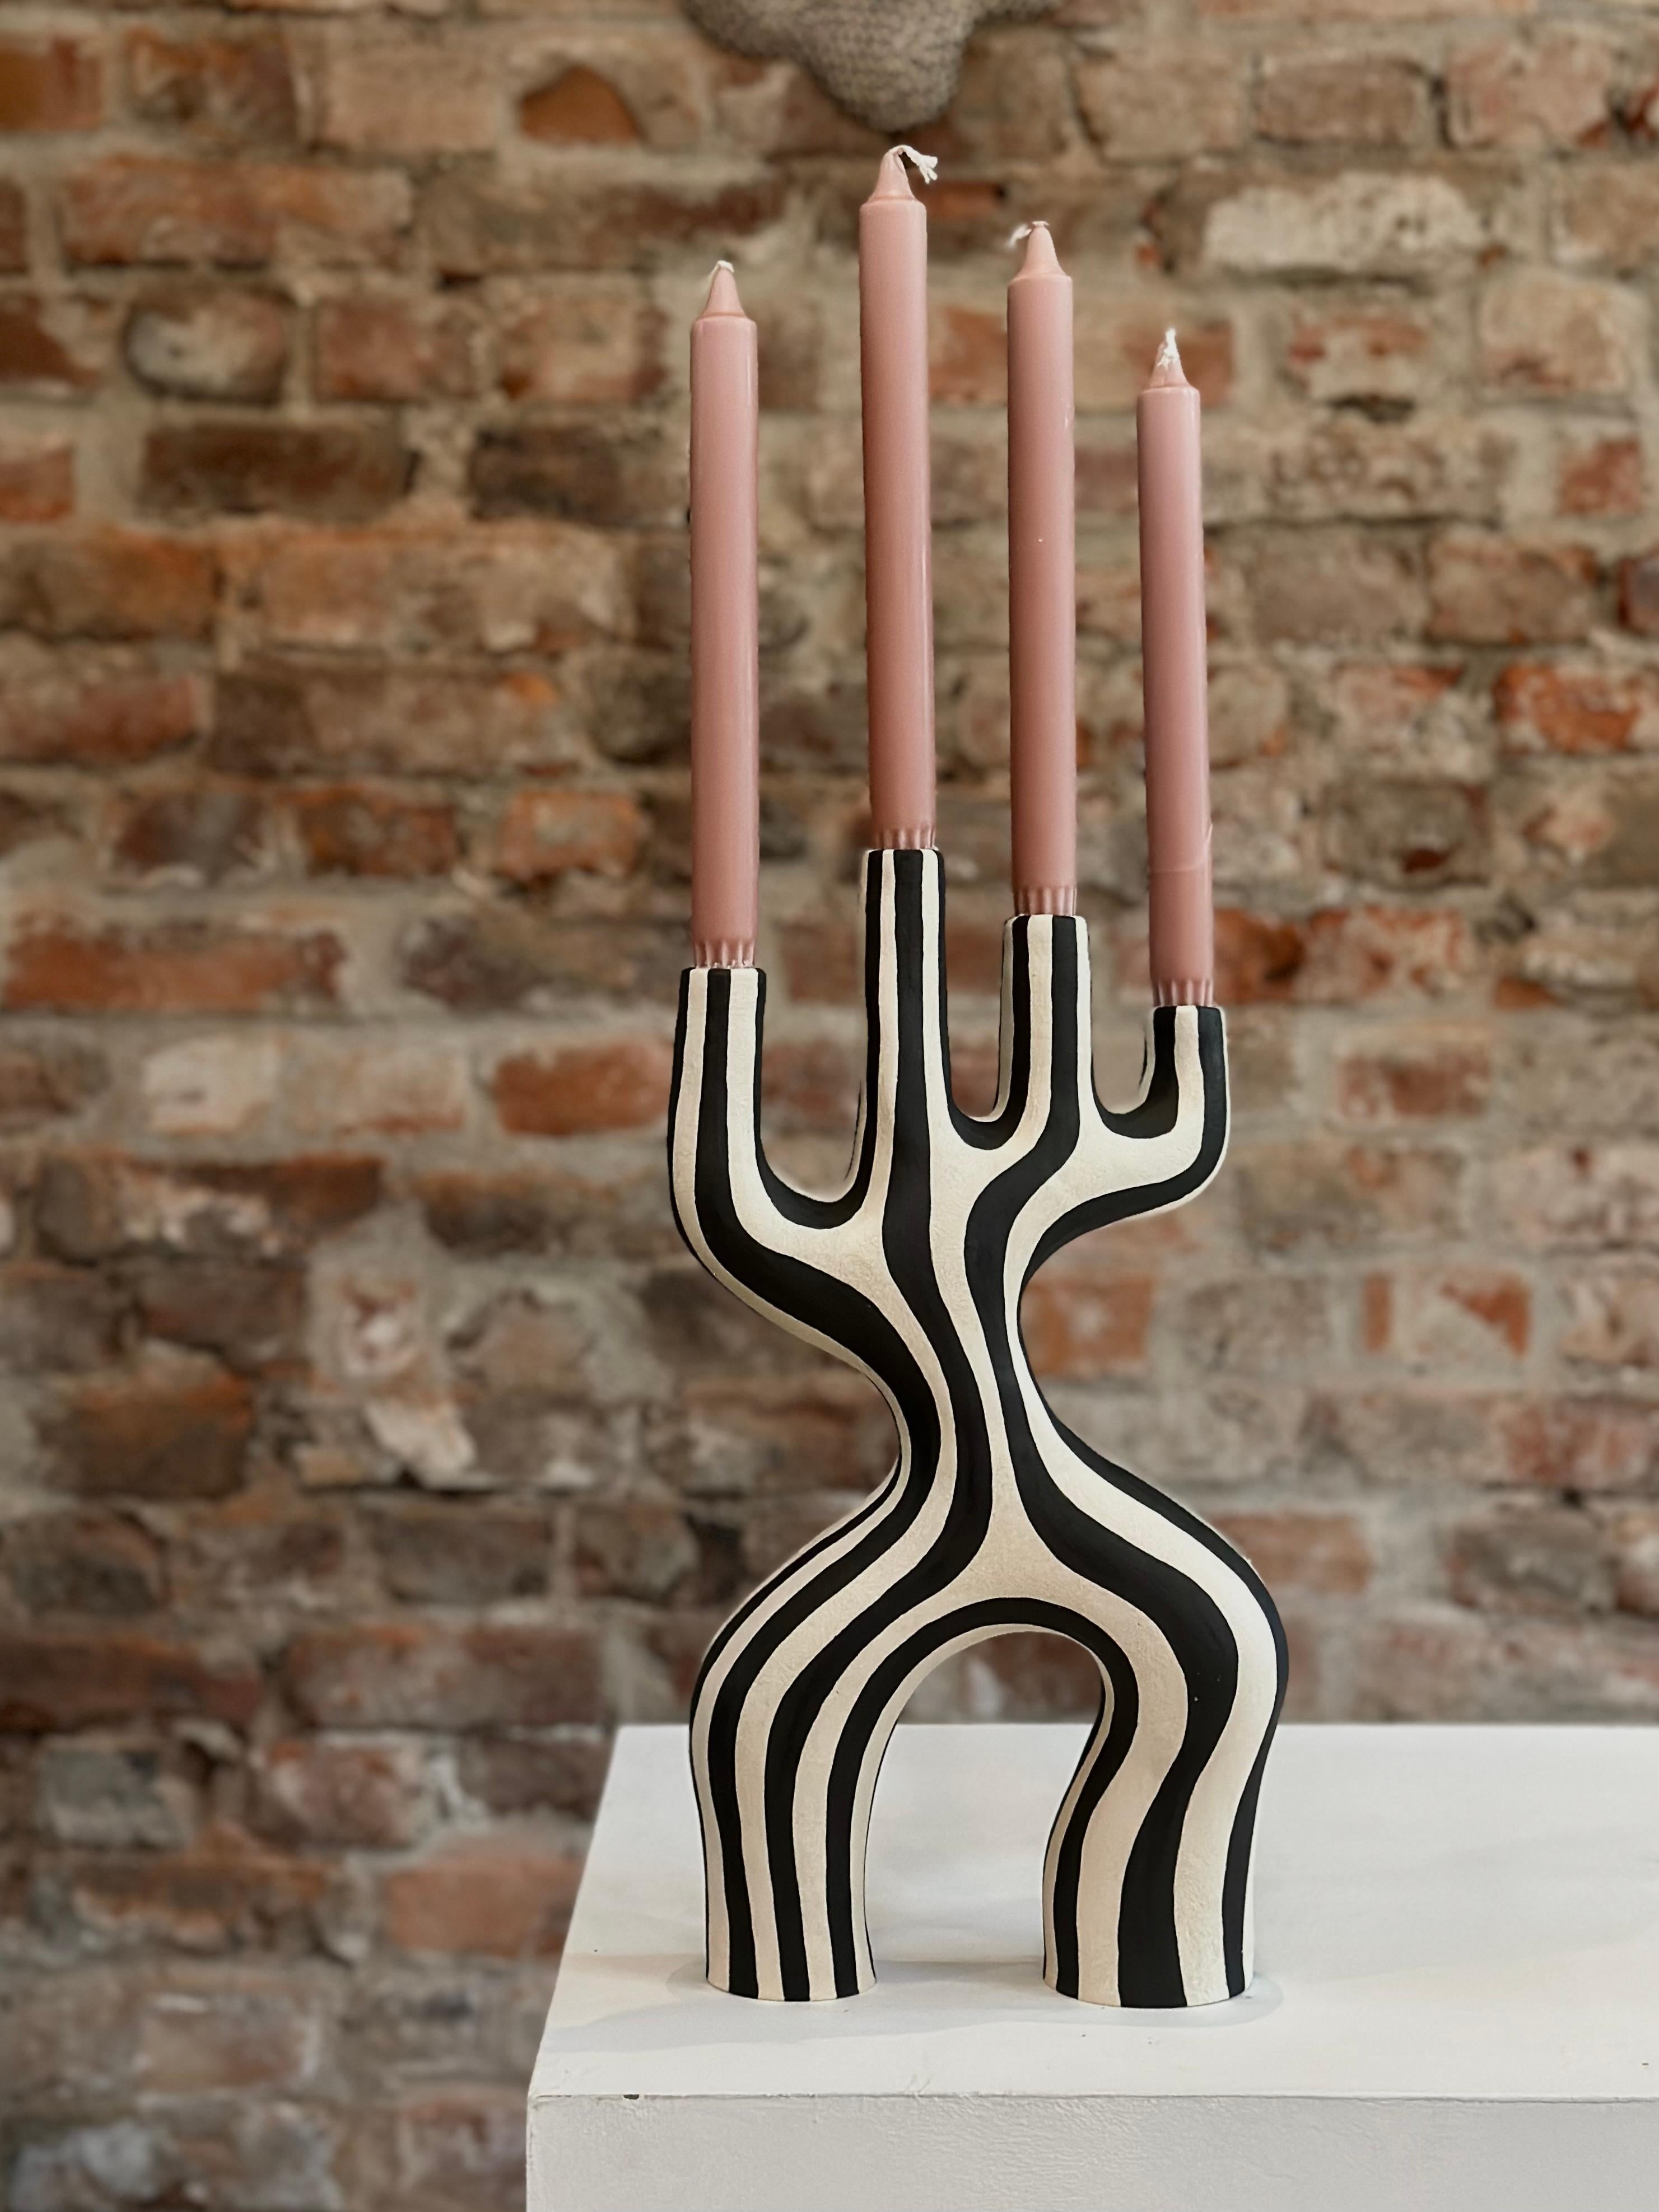 This unique candle holder is handcrafted by the Norwegian artist Johanne Birkeland, who works under the artist name Jossolini. 

The candelabras are all built and decorated by hand, so no piece is like another. The size and shape will still be